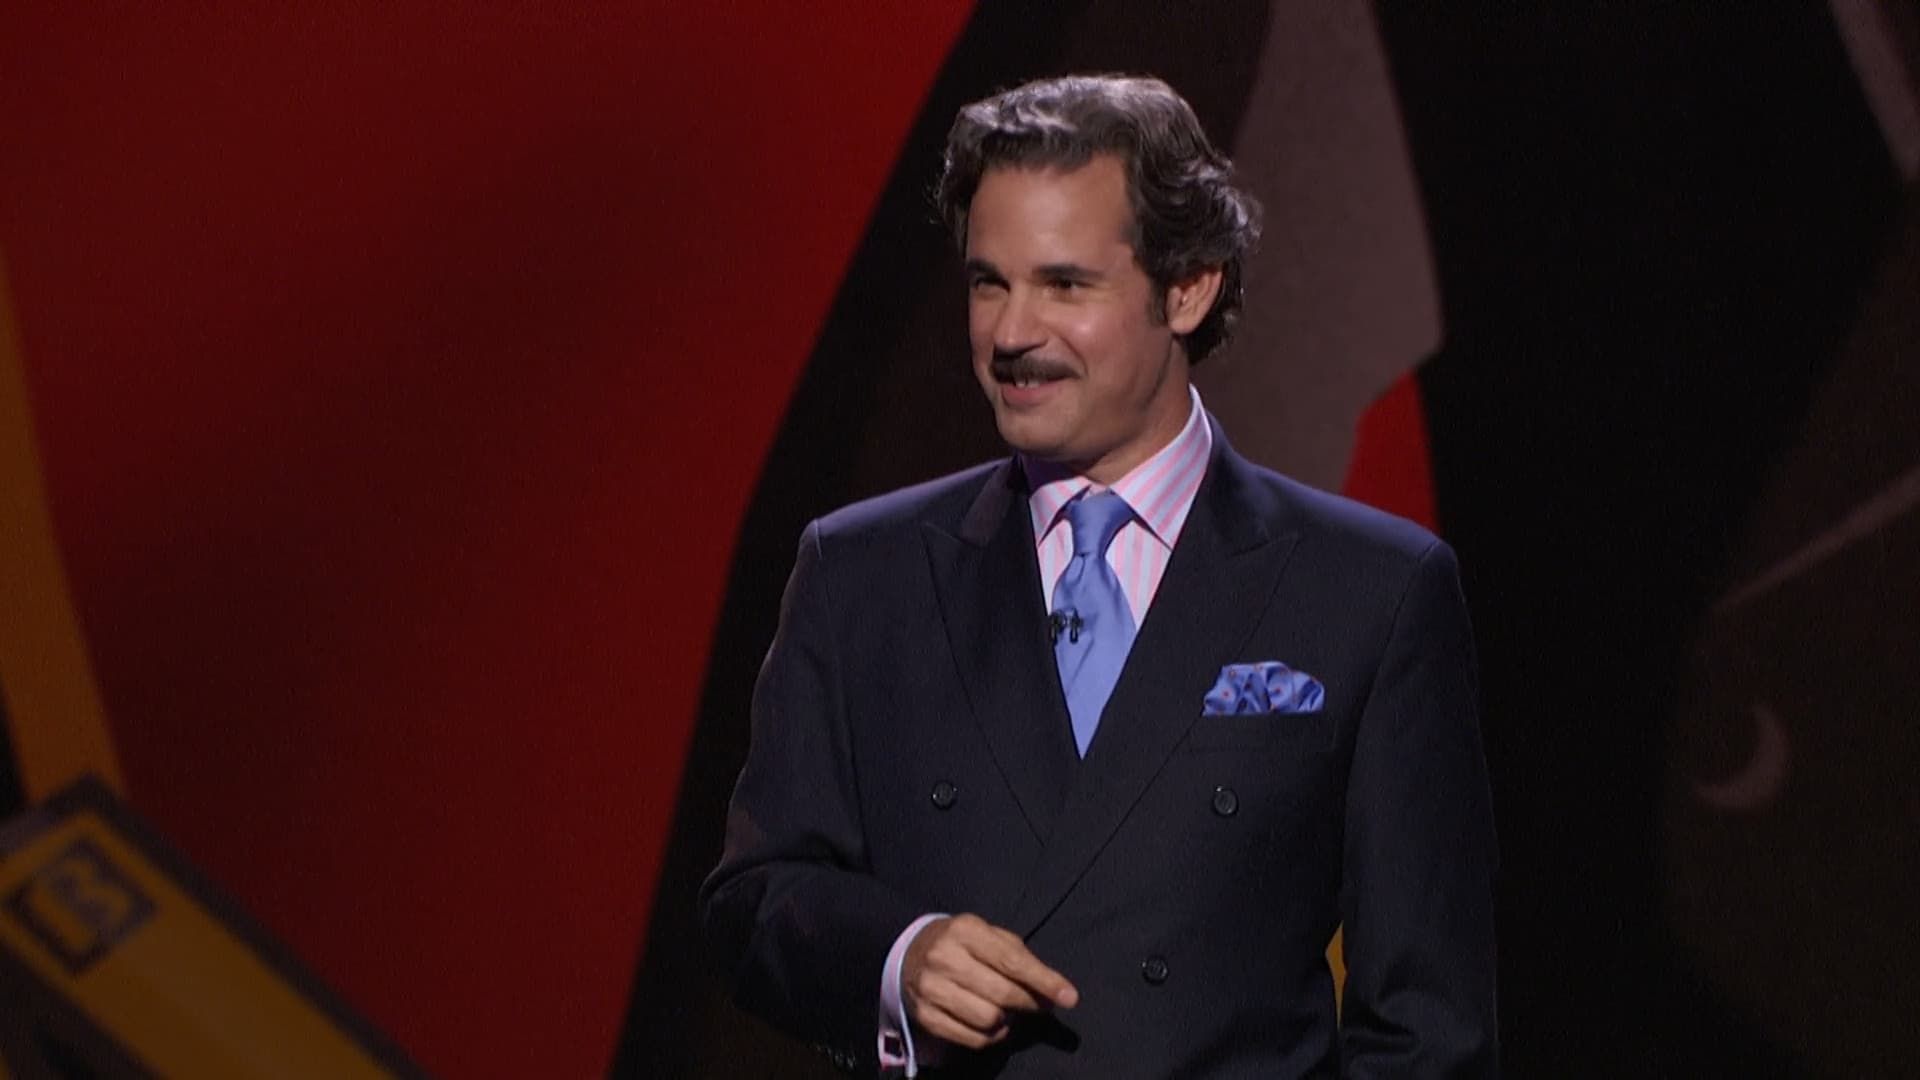 Paul F. Tompkins: Laboring Under Delusions background